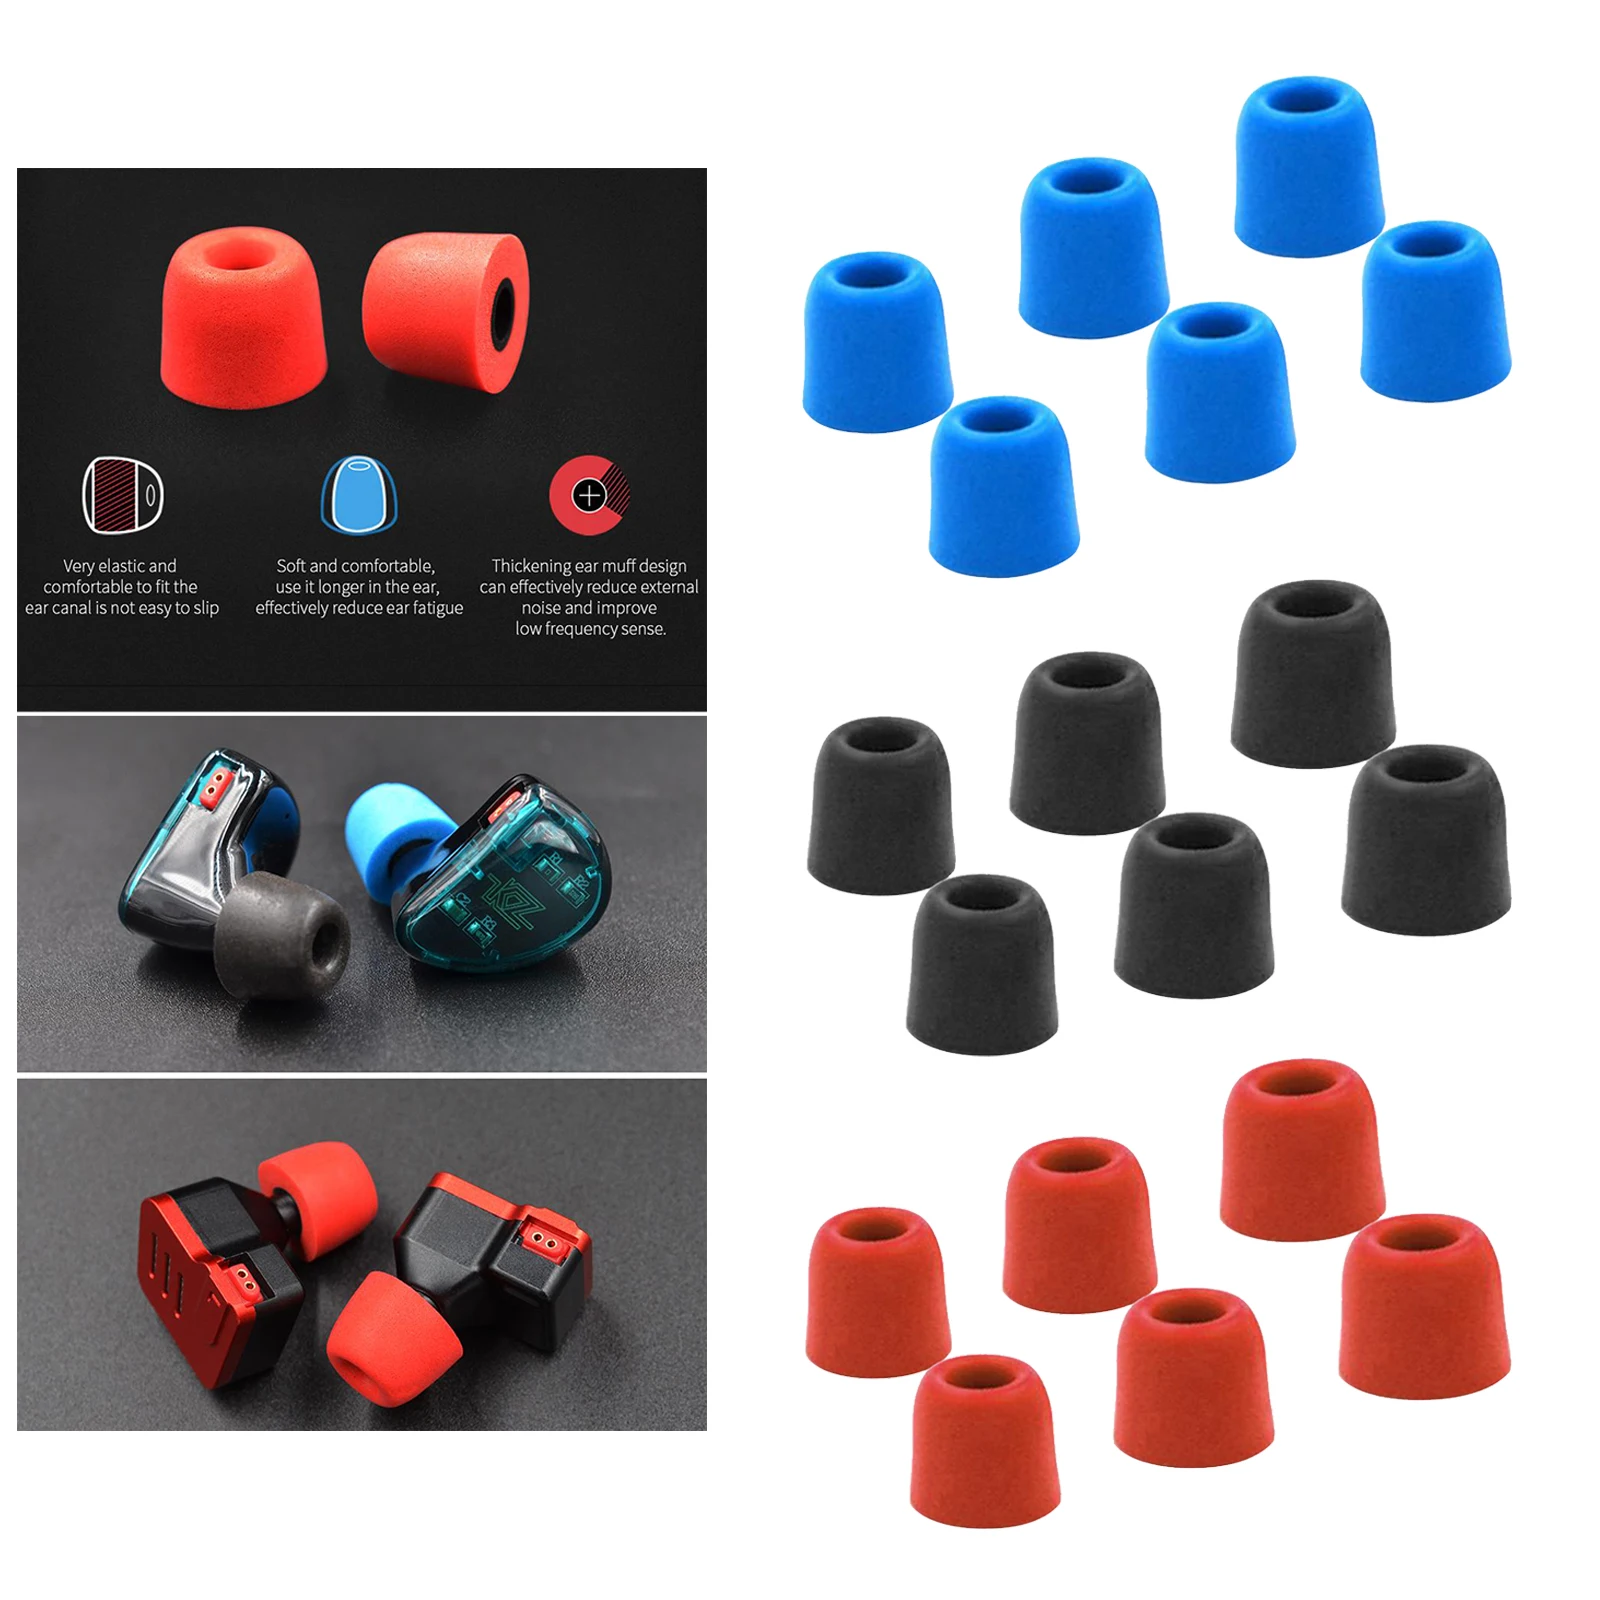 New 3Pair(6pcs) Noise Isolating Comfortble Memory Foam Ear Tips Pads Earbuds For In Earphone Headphones